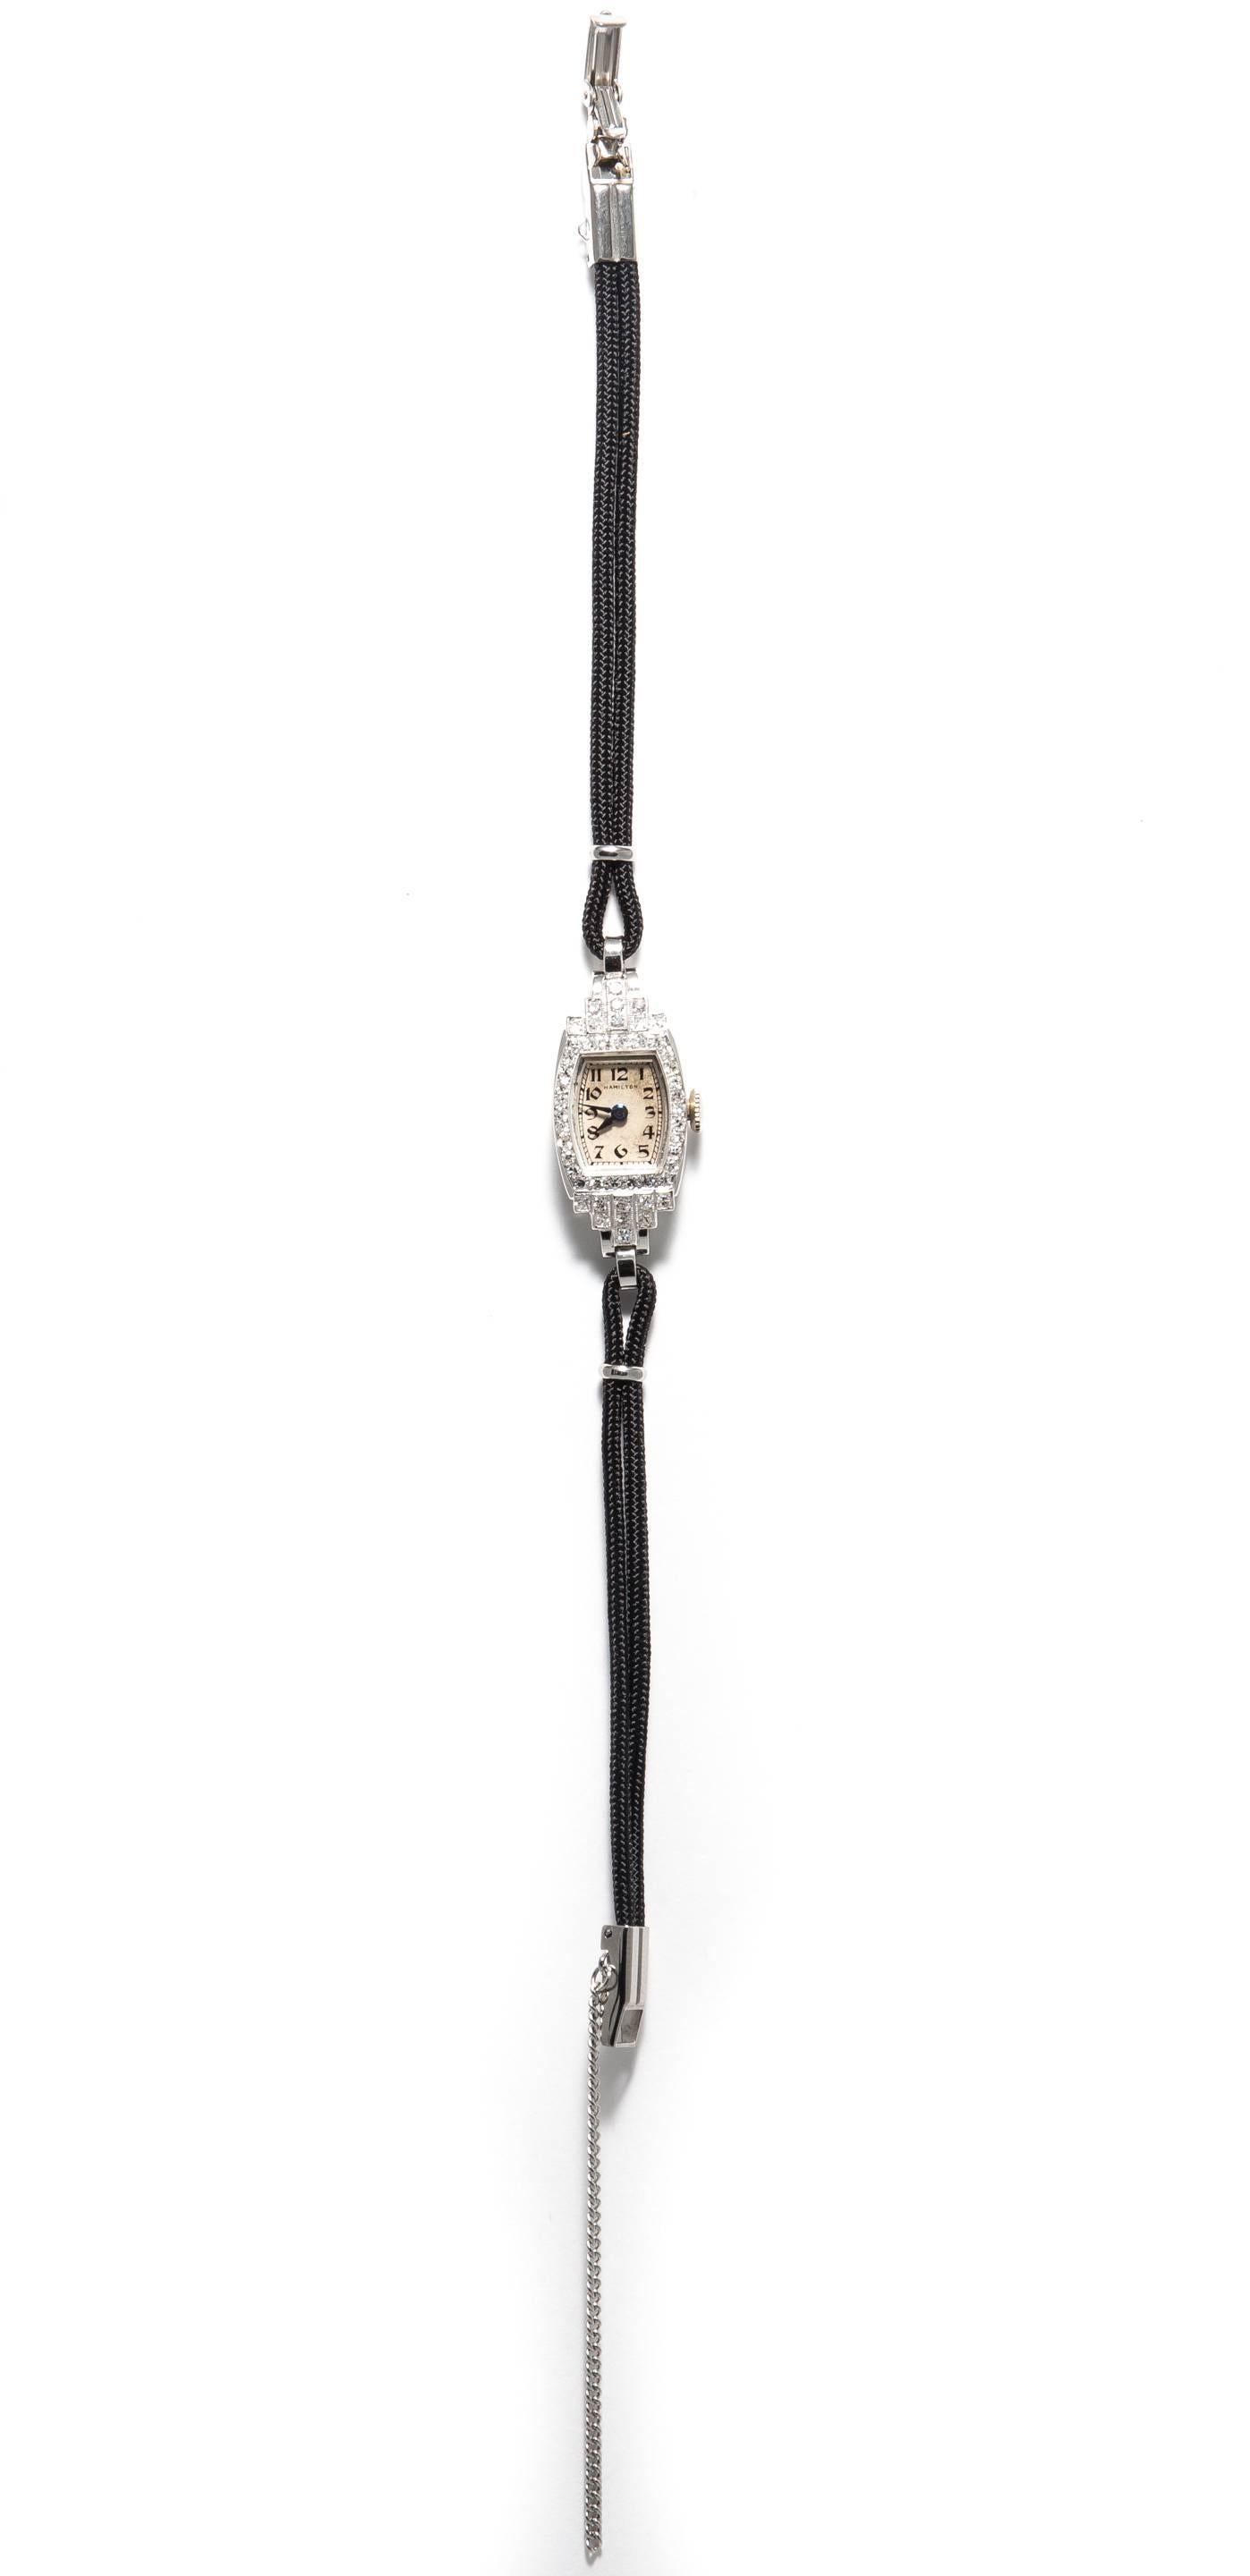 An art deco period ladies platinum, and diamond Hamilton wrist watch.  Set throughout with forty eight Swiss cut diamonds, this watch also features a stylish black woven silk cord strap that can be adjusted to fit any size wrist on request.

In